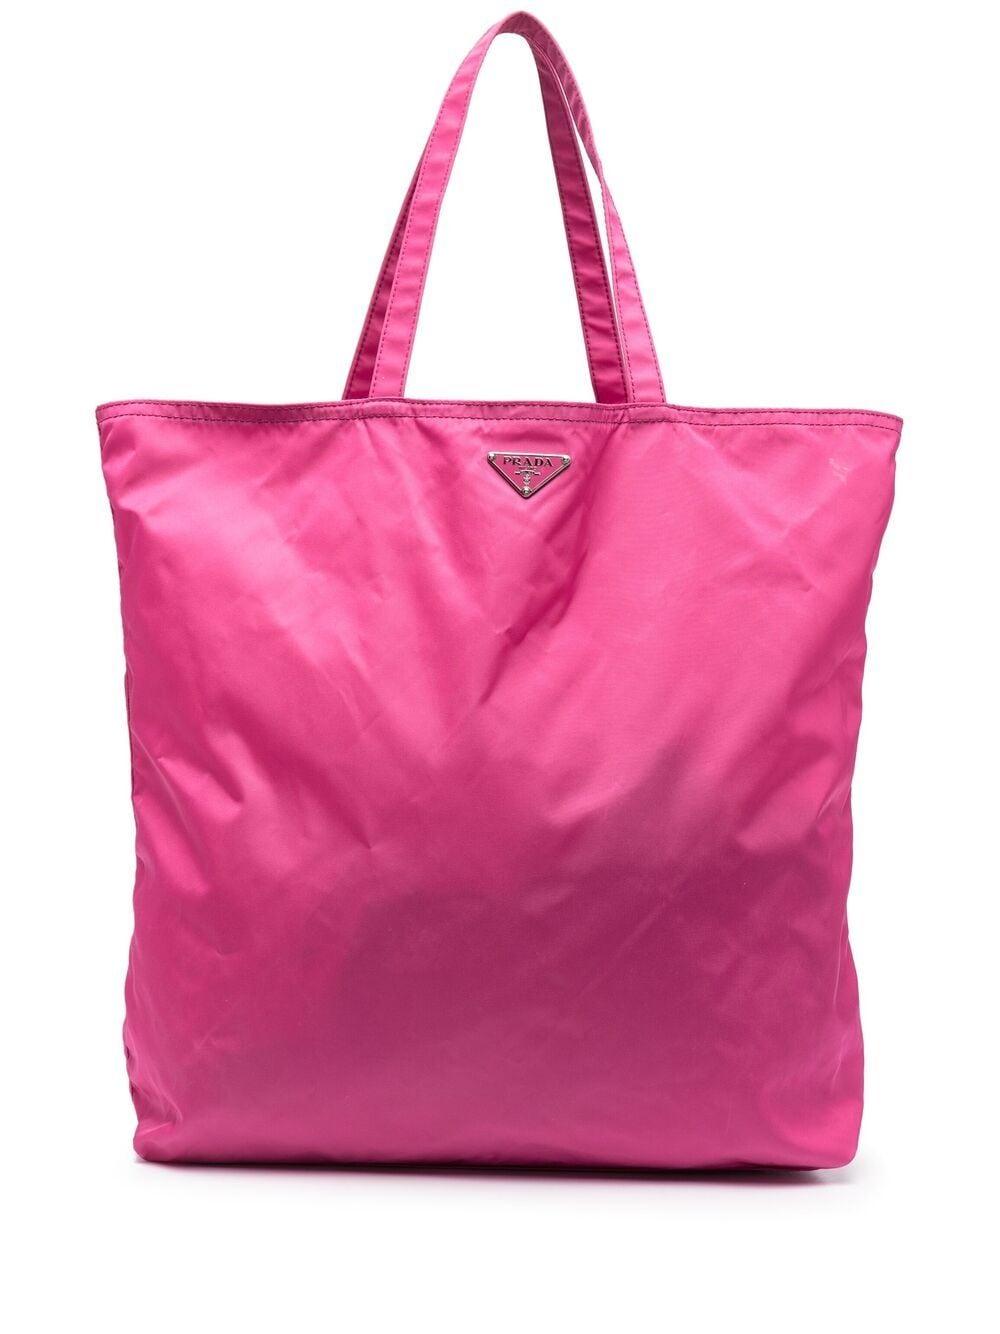 Prada pink Robot nylon tote bag featuring top handles, a front logo plaque, an inside zip pocket, a fancy decorative motive.
100% Nylon
In excellent vintage condition. Made in Italy. 
12.9in. (33cm) X 13.7in. (35cm)
We guarantee you will receive